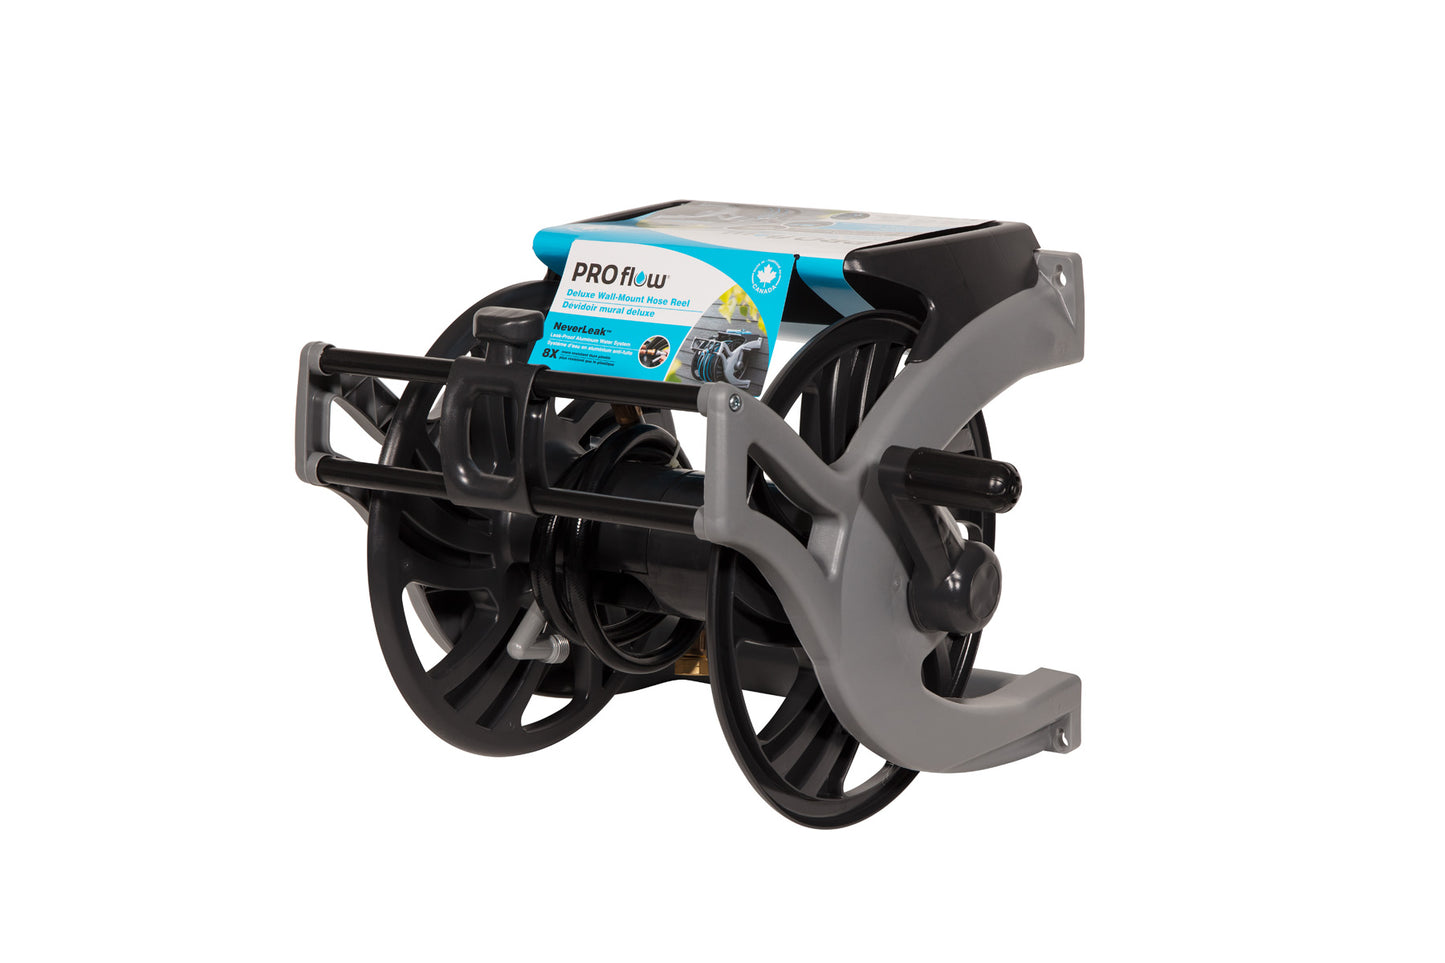 Ames Never Leak Mural Hose Reel and Tray - 225-ft Capacity